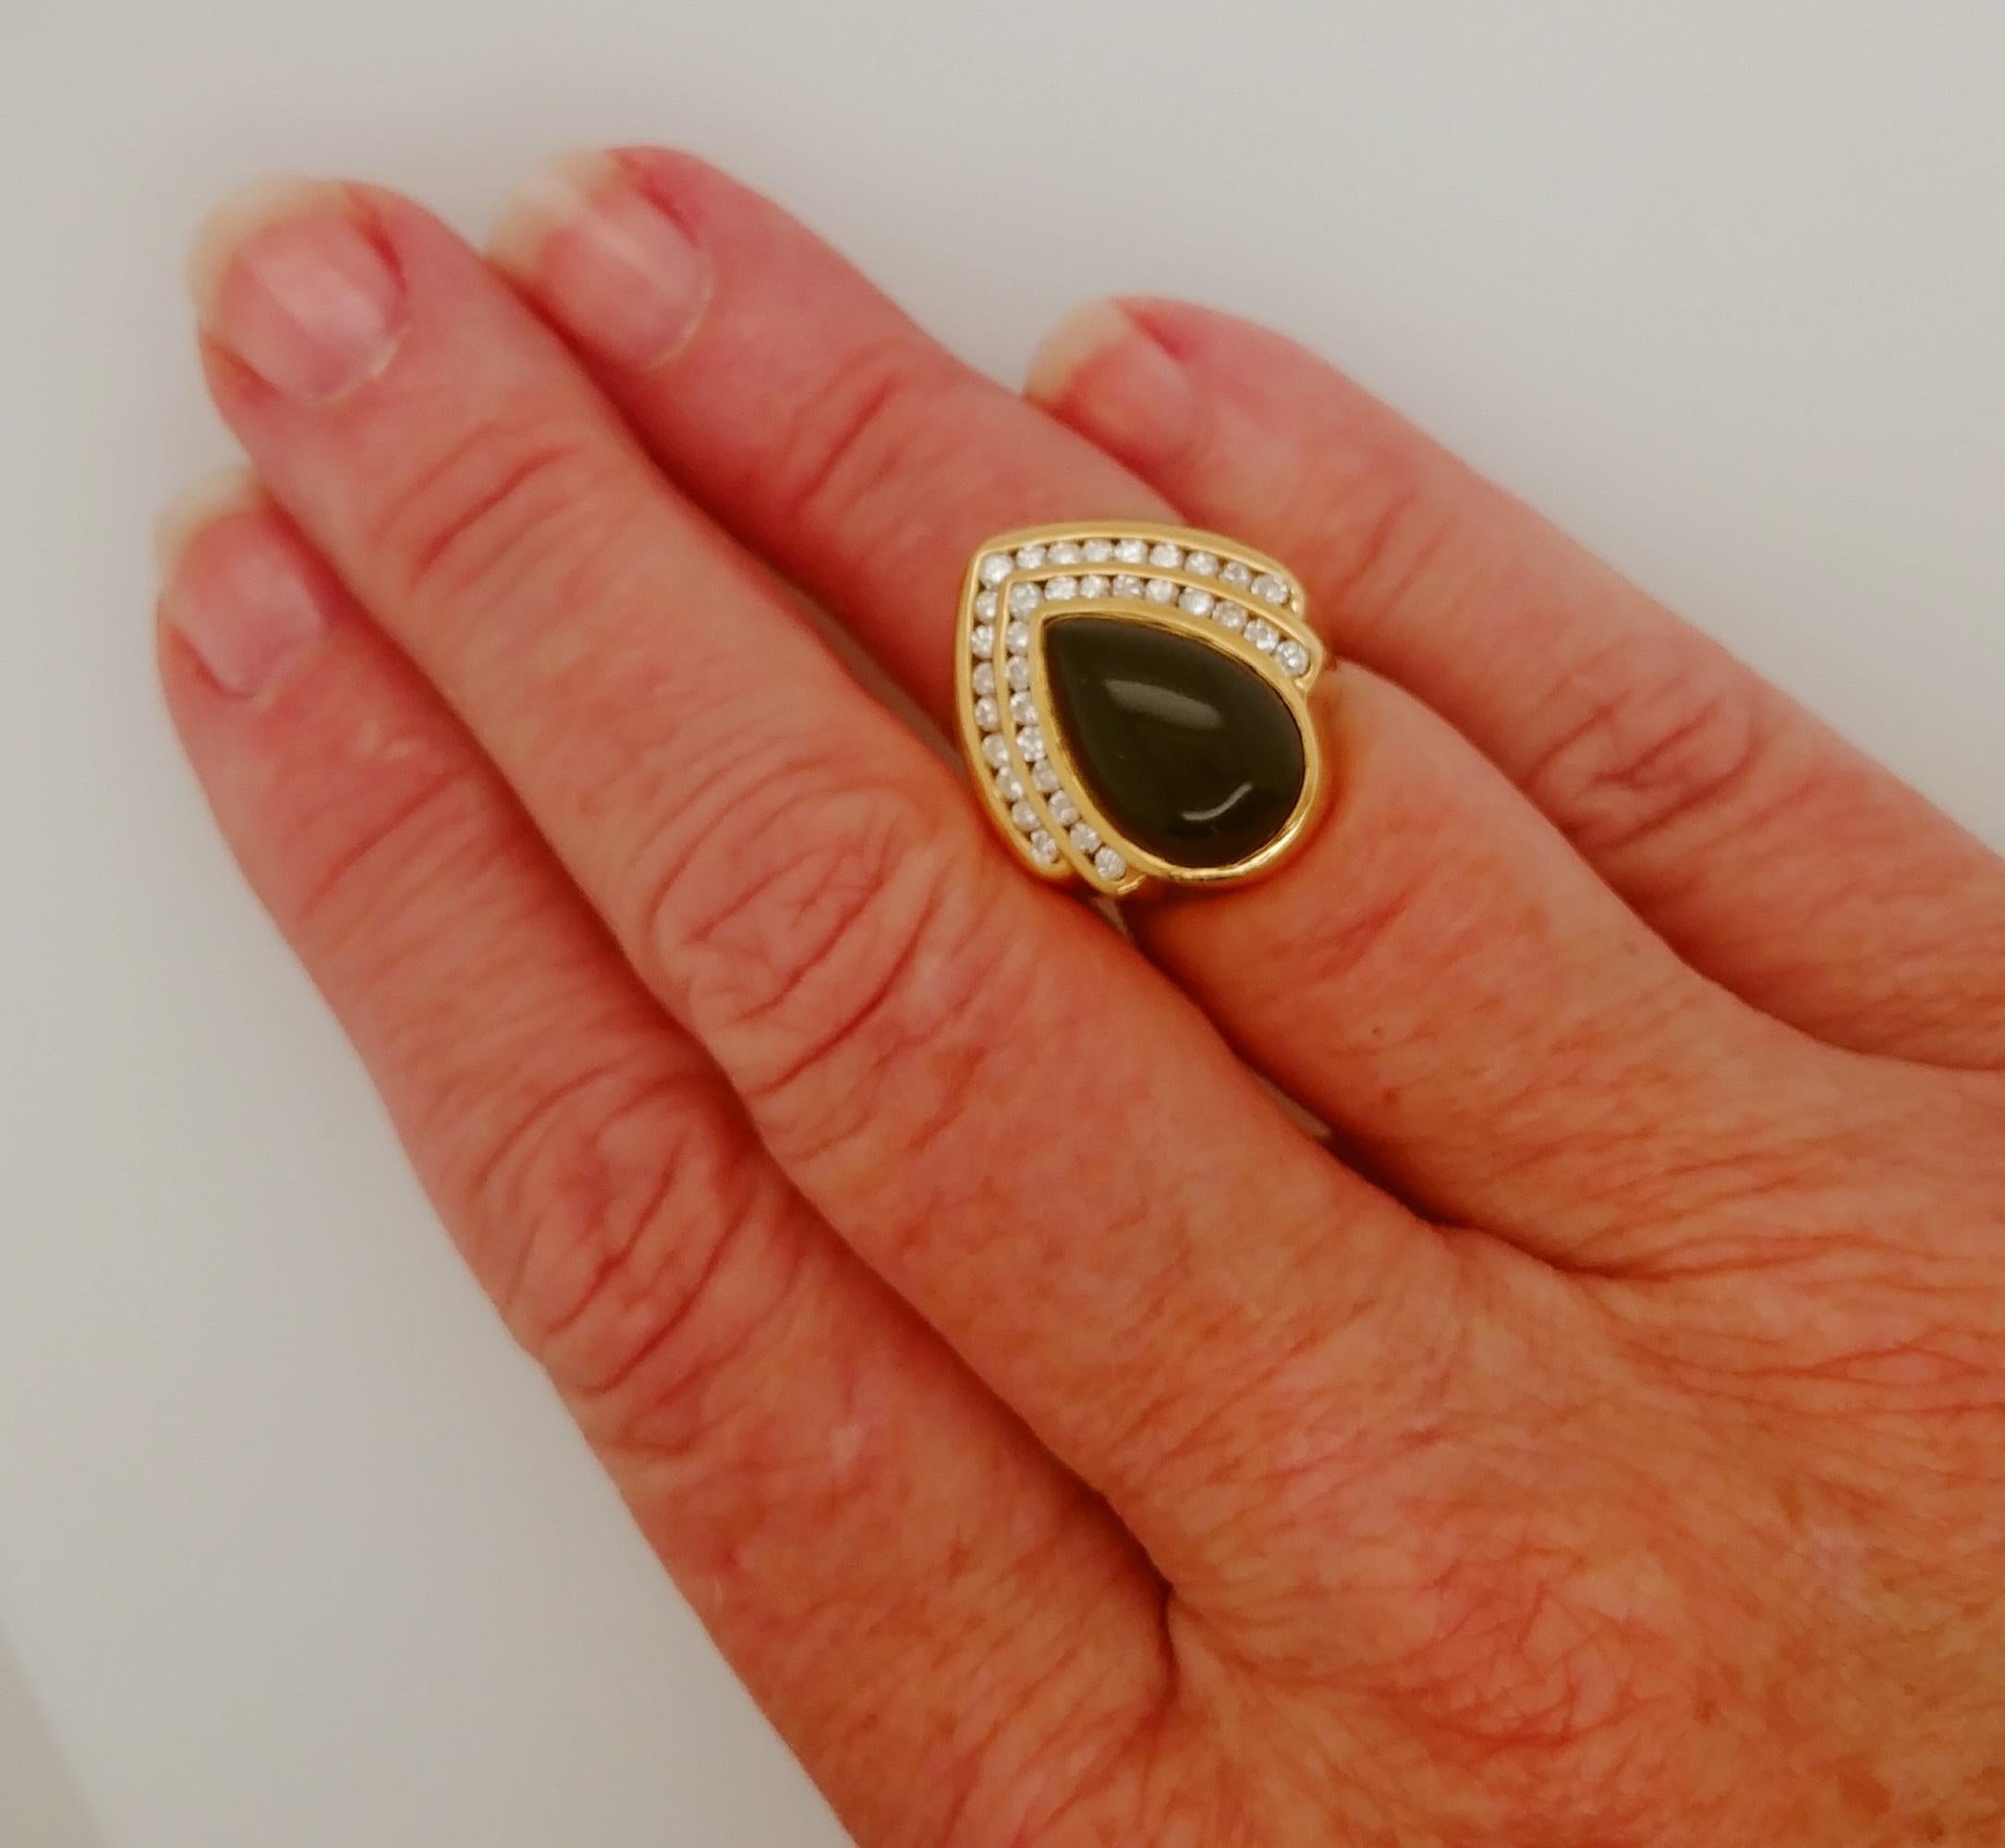 Pear Shape Cabochon Cut Onyx and Diamond Ladies Fashion Statement Ring features 18K stamped inside of Yellow Gold  shank in addition to the copyright stamp.  The black onyx center is 14.5x10mm with overall ring top a stunning 21.5x19.5mm overall.